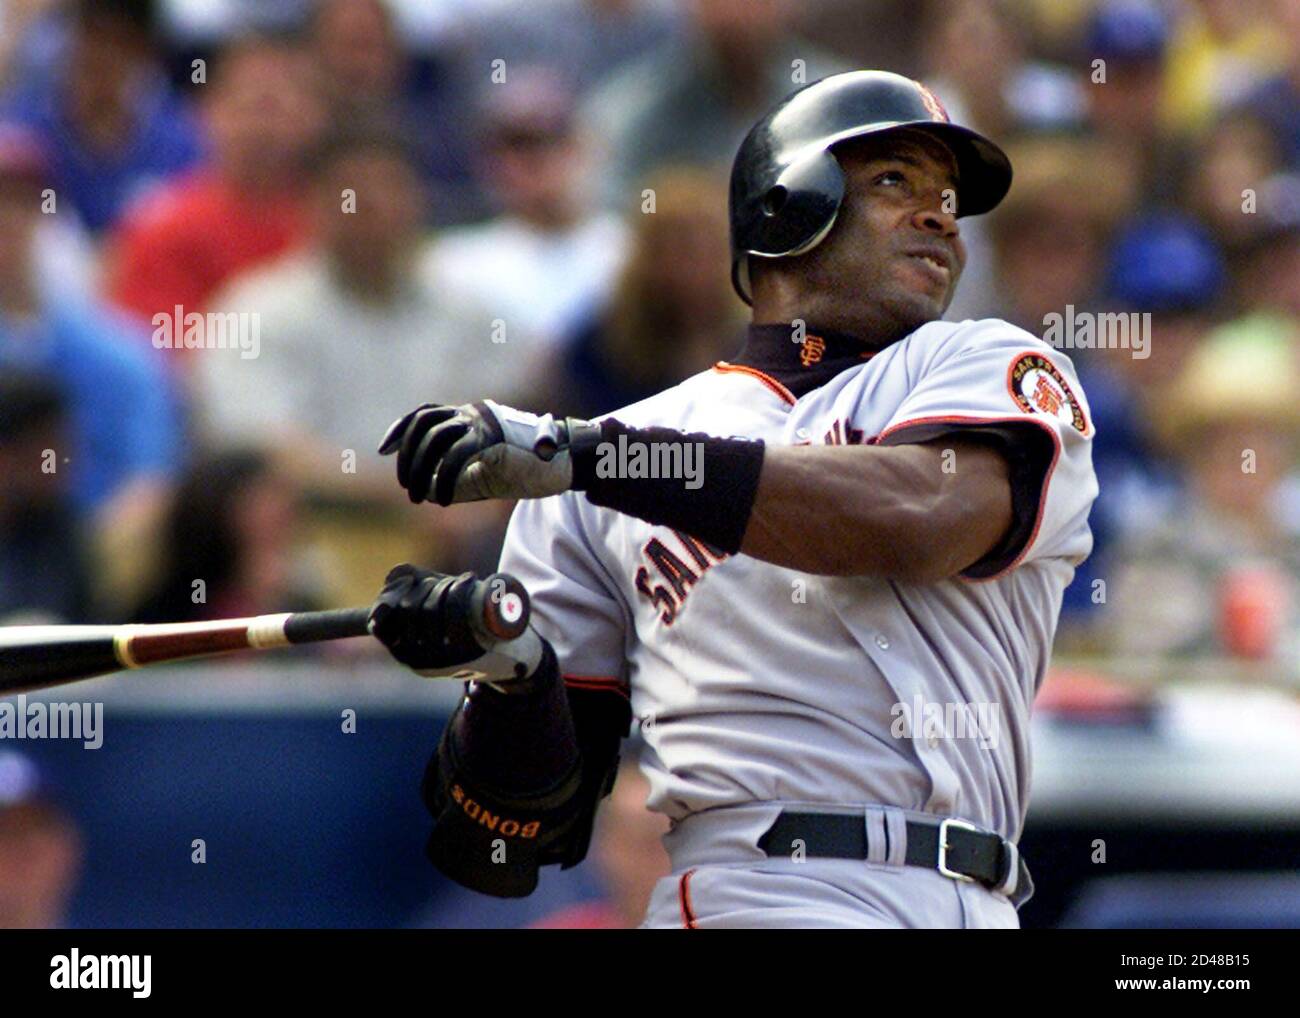 San Francisco Giants' Barry Bonds connects for his second home run of the  game in the season opener against the Los Angeles Dodgers April 2, 2002 in  Los Angeles. Bonds, who set